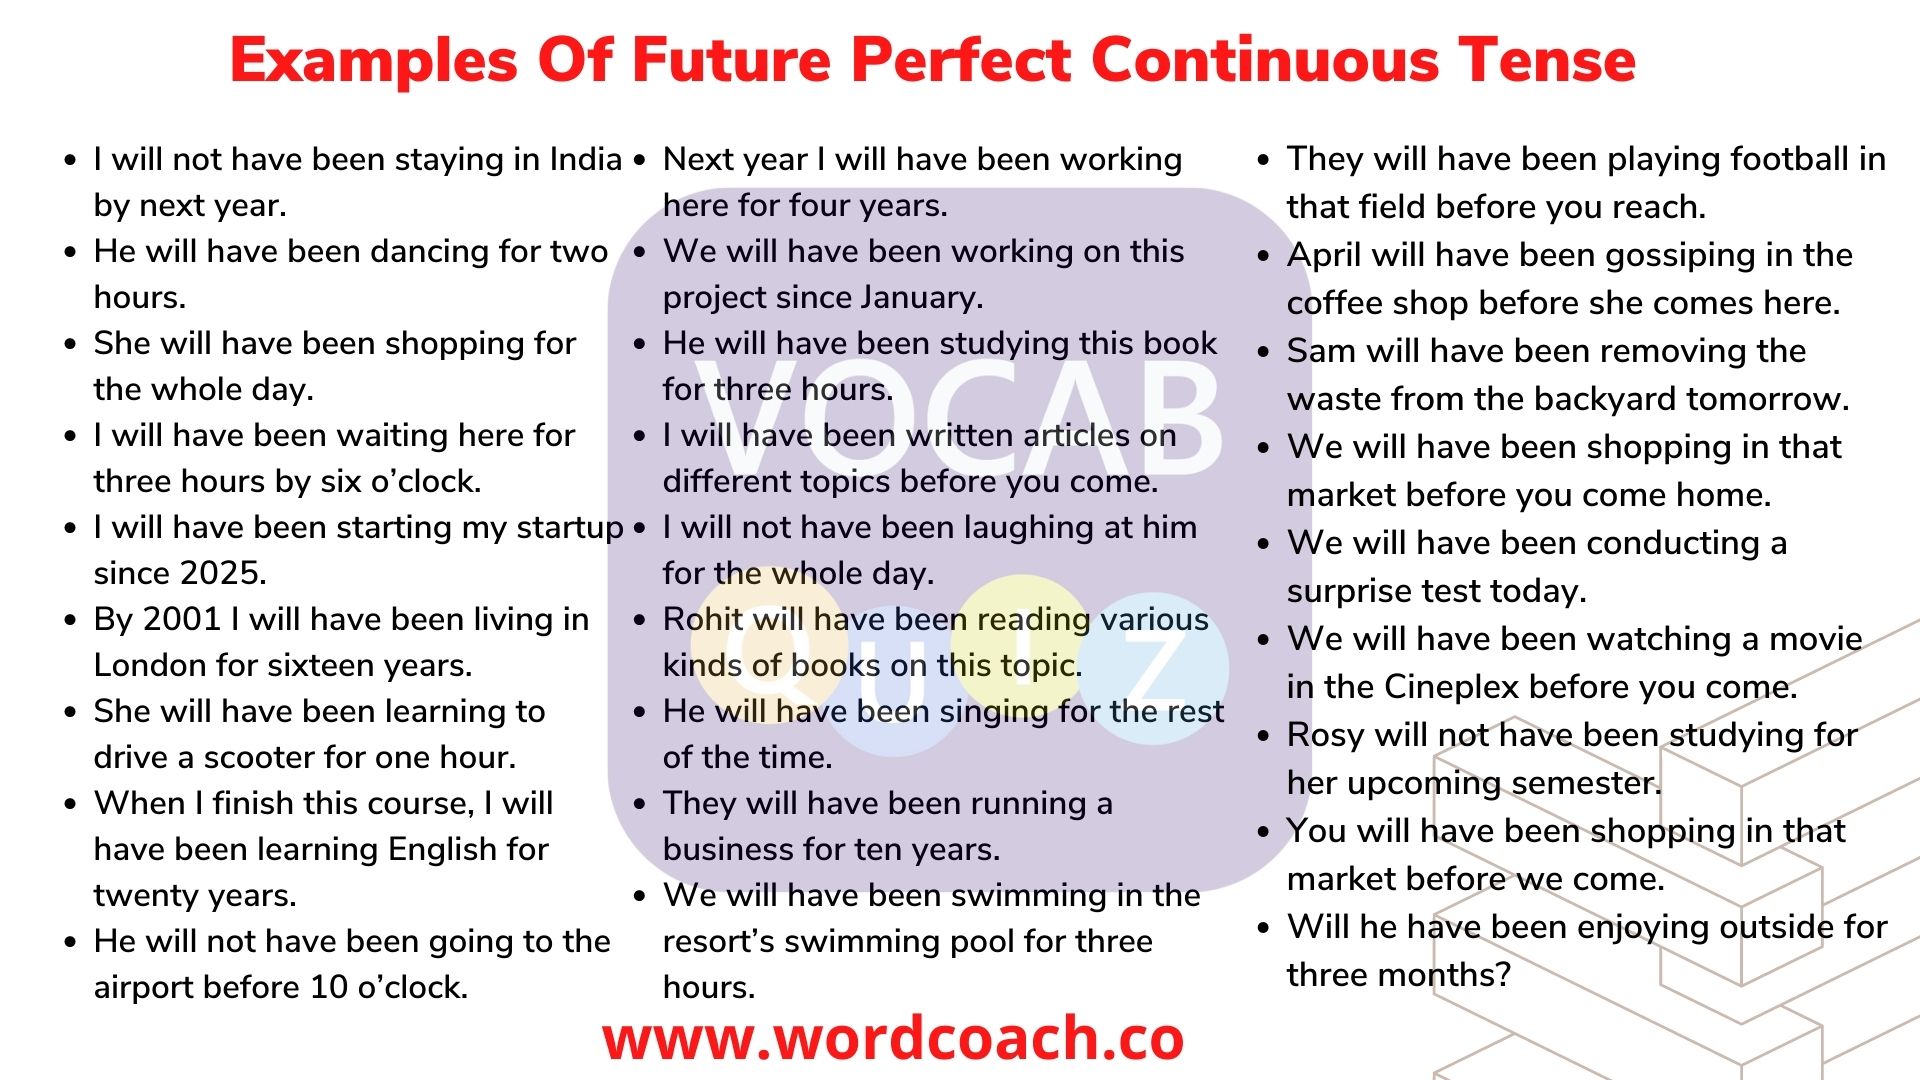 examples-of-future-perfect-continuous-tense